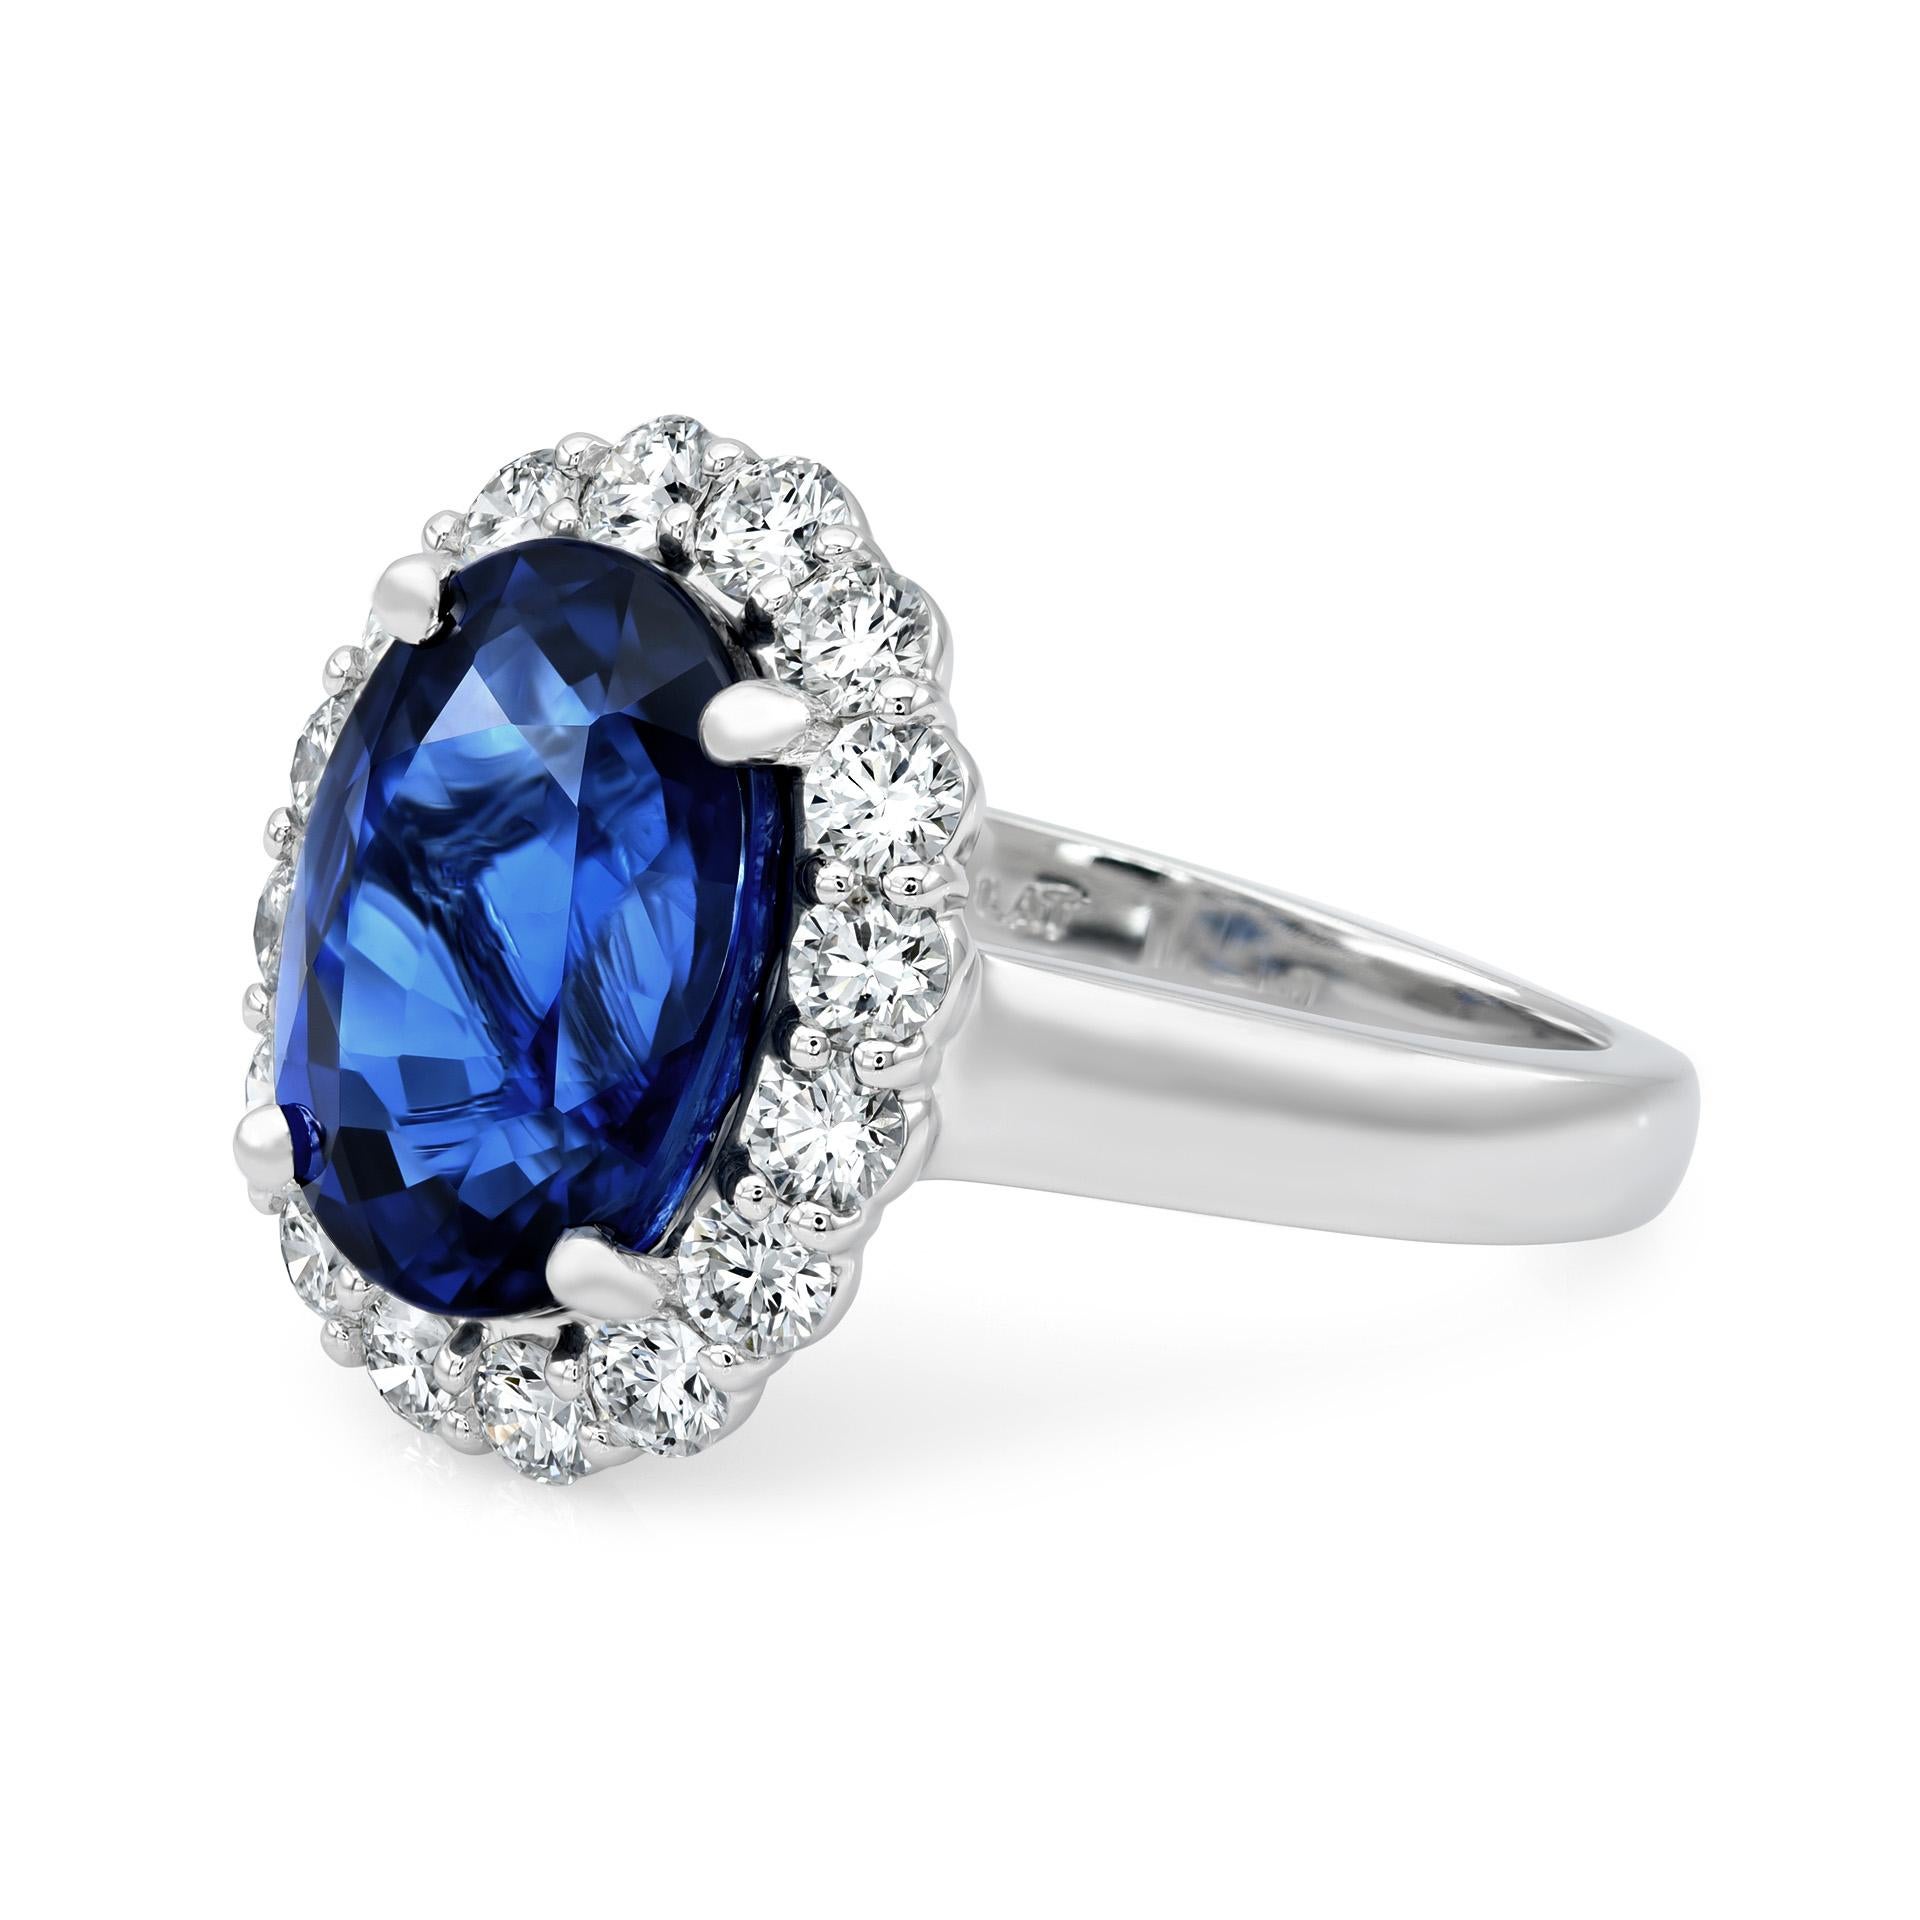 Experience the embodiment of elegance with our exquisite Blue Sapphire Ring. It features a stunning 7.03 carat natural blue sapphire from Sri Lanka, delicately set in a Platinum band adorned with 1.05 carats of dazzling diamonds. The oval-cut